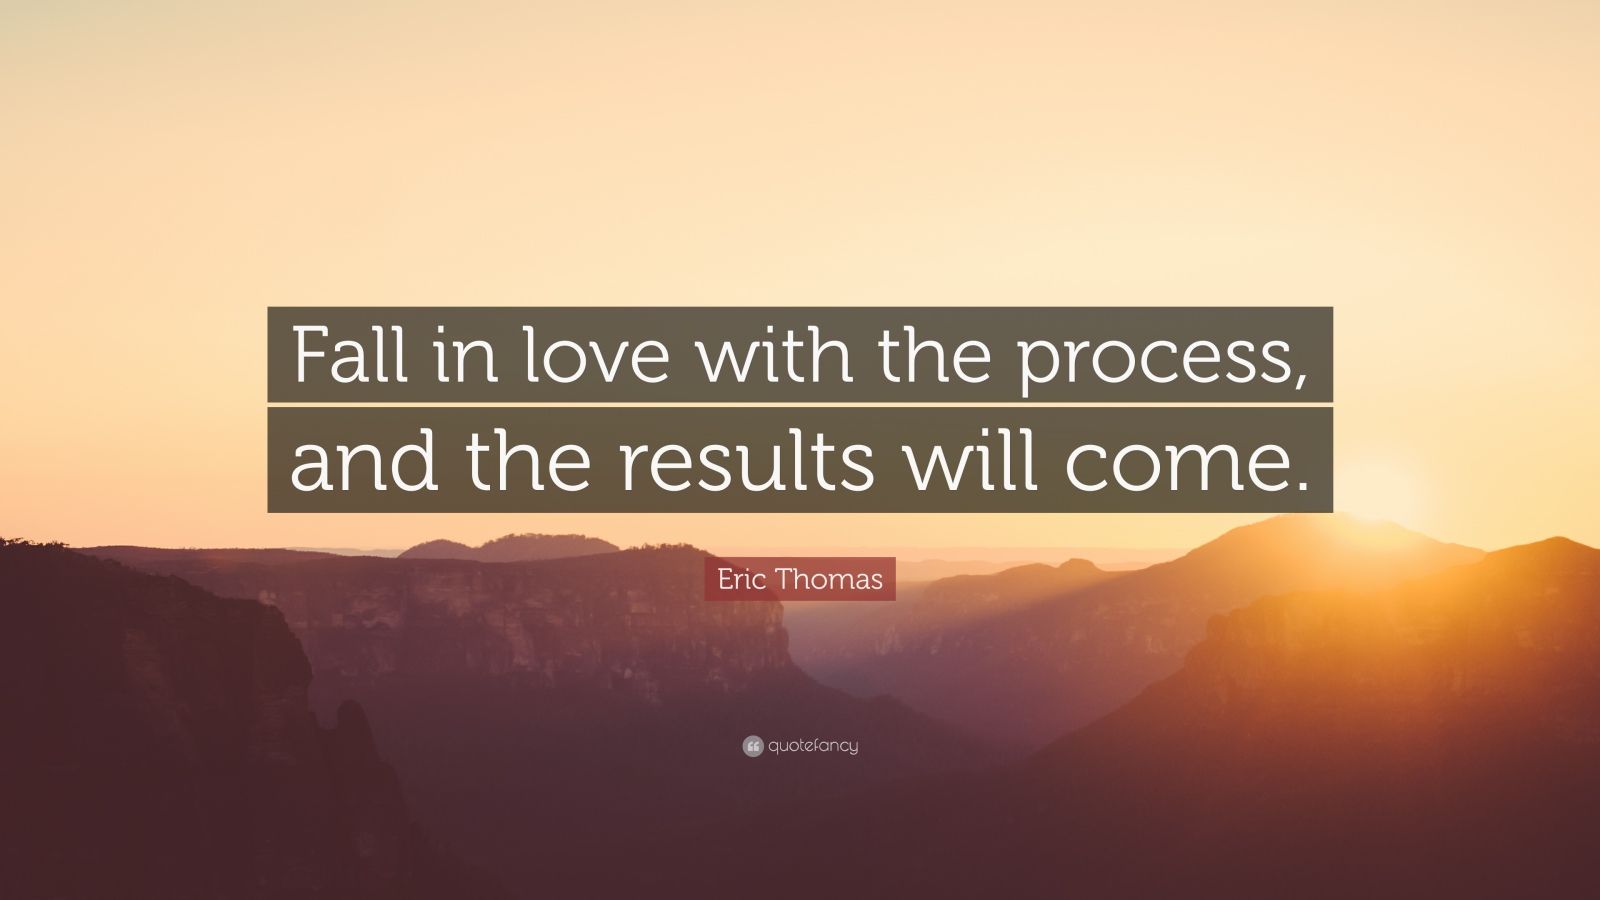 Eric Thomas Quote: “Fall in love with the process, and the results will